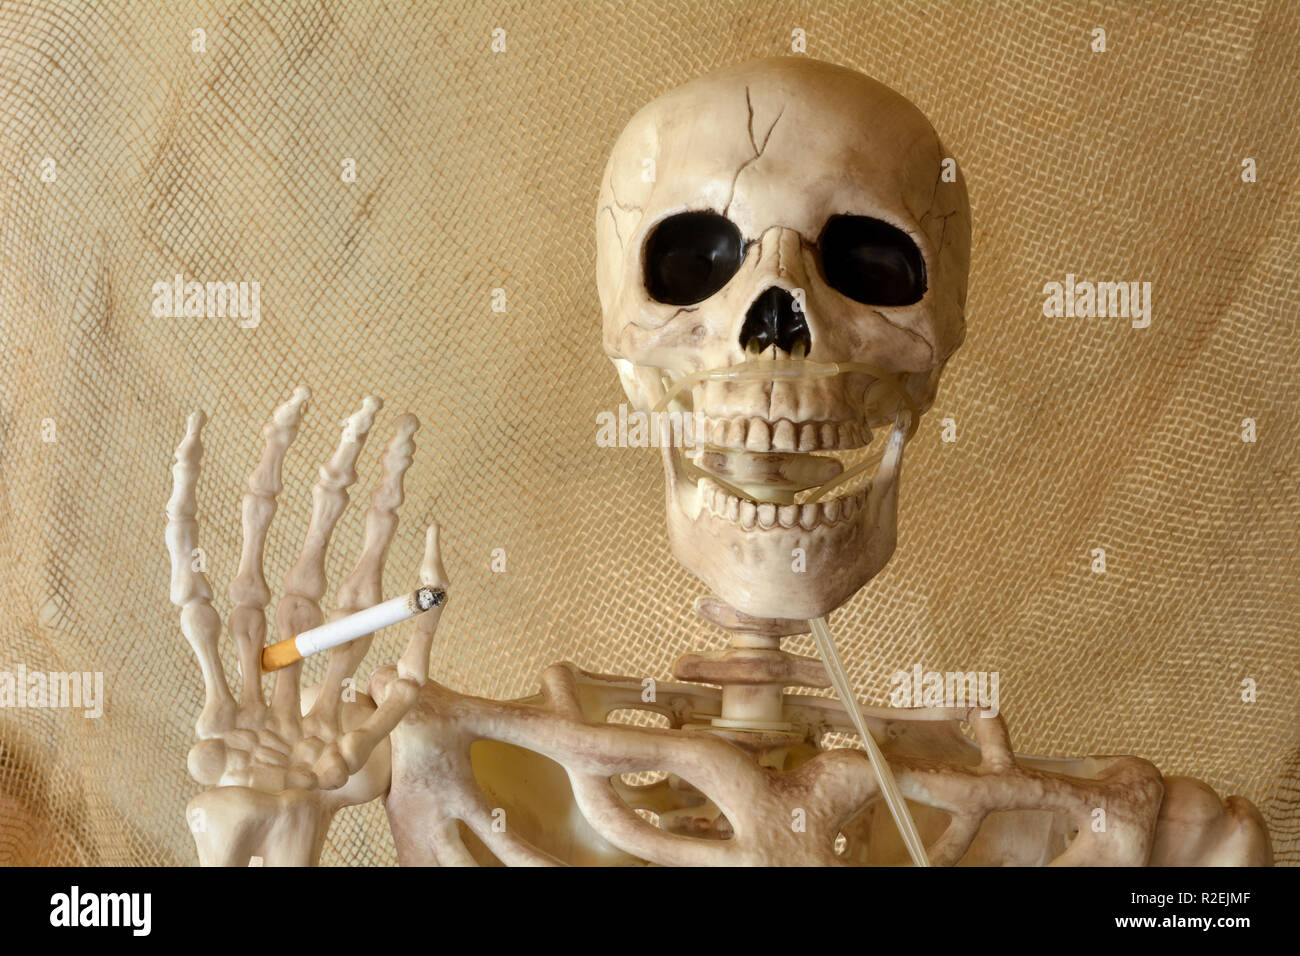 Skeleton holding lit cigarette with hand and canula for oxygen attached to nasal cavity Stock Photo